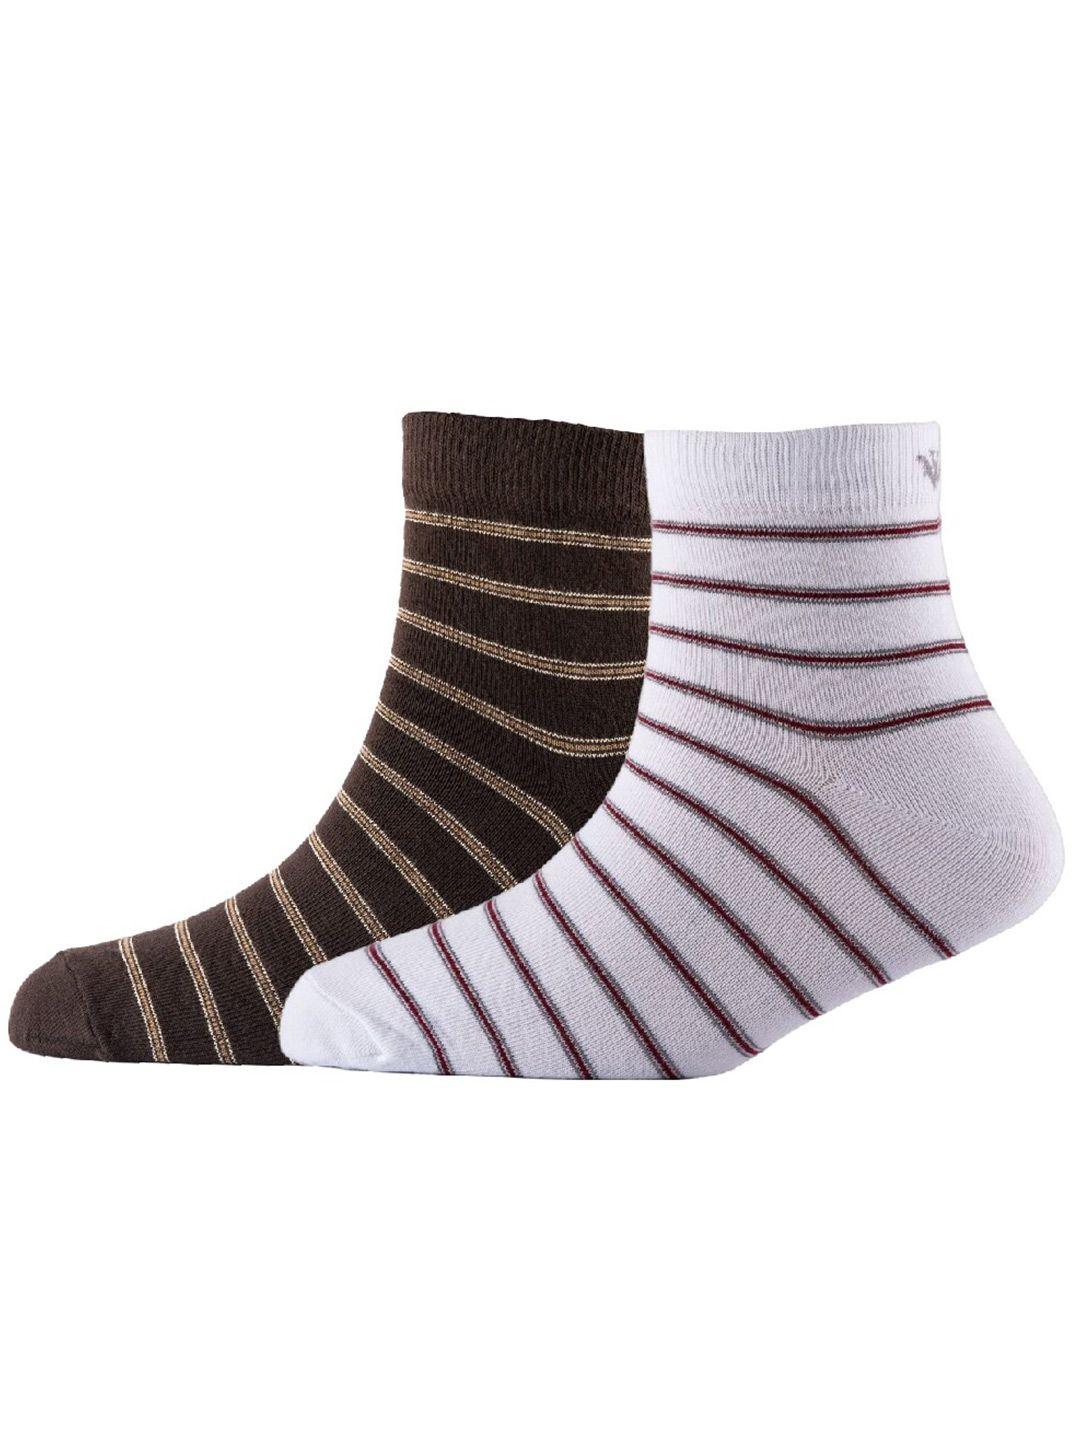 cotstyle men pack of 2 striped cotton ankle length socks